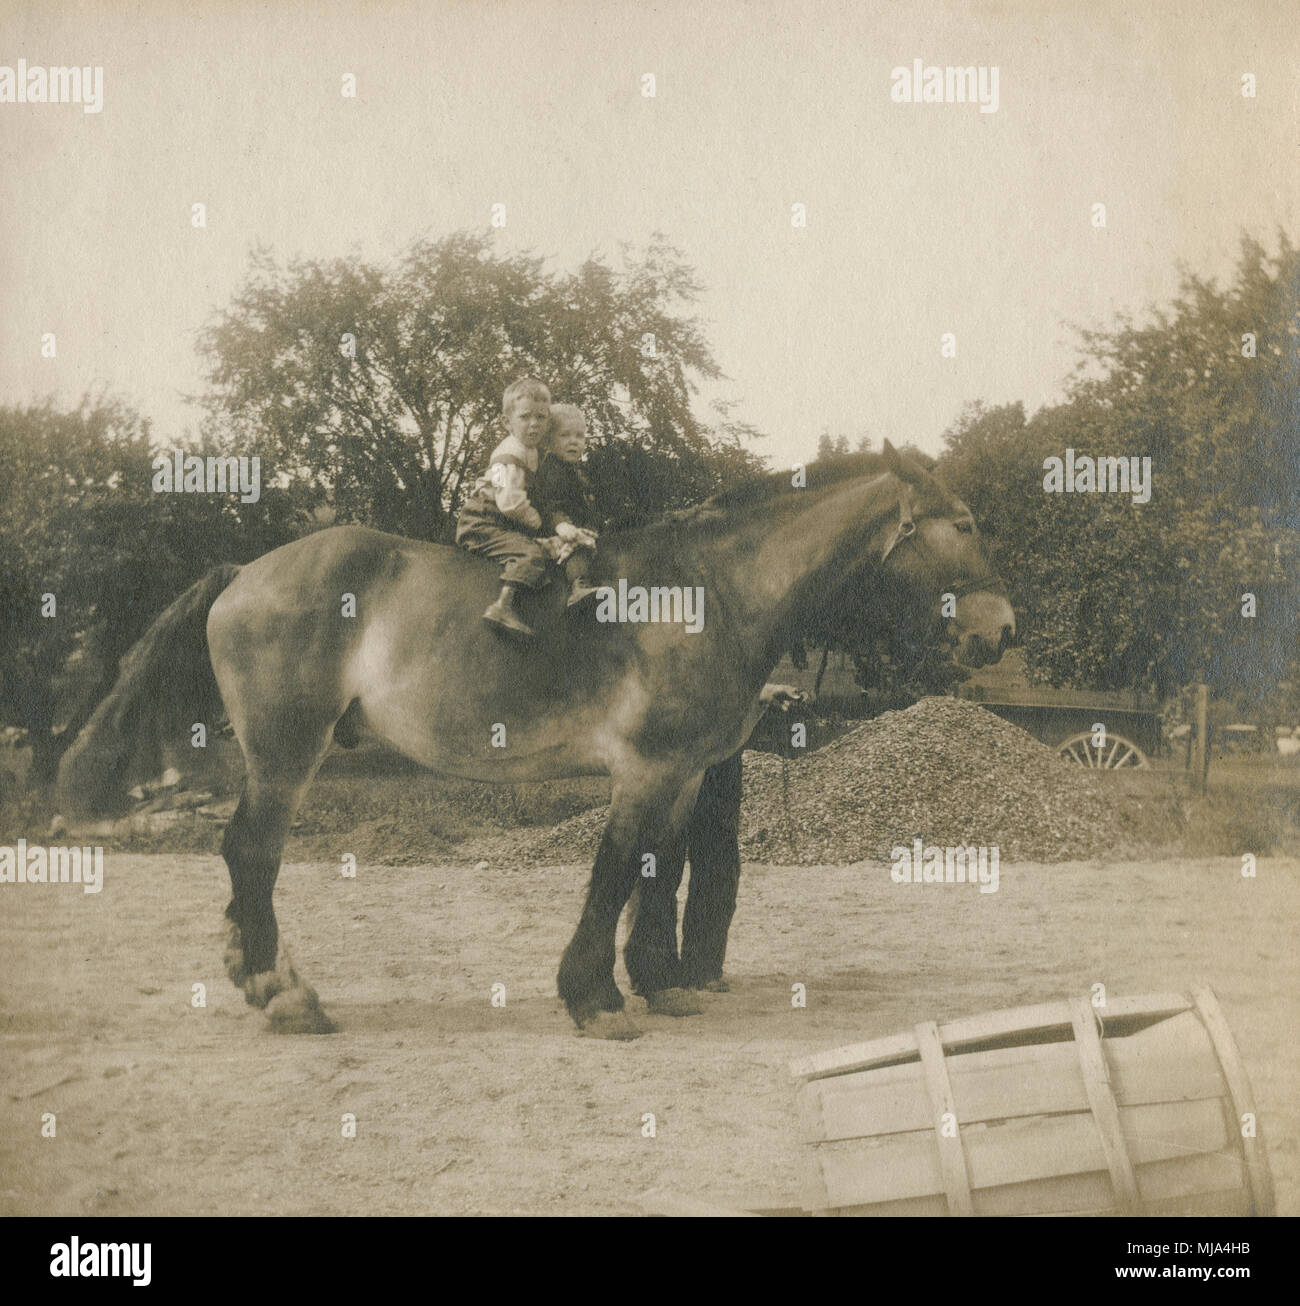 Antique c1905 photograph, two young boys on horseback. Location unknown, probably New England, USA. SOURCE: ORIGINAL PHOTOGRAPHIC PRINT. Stock Photo